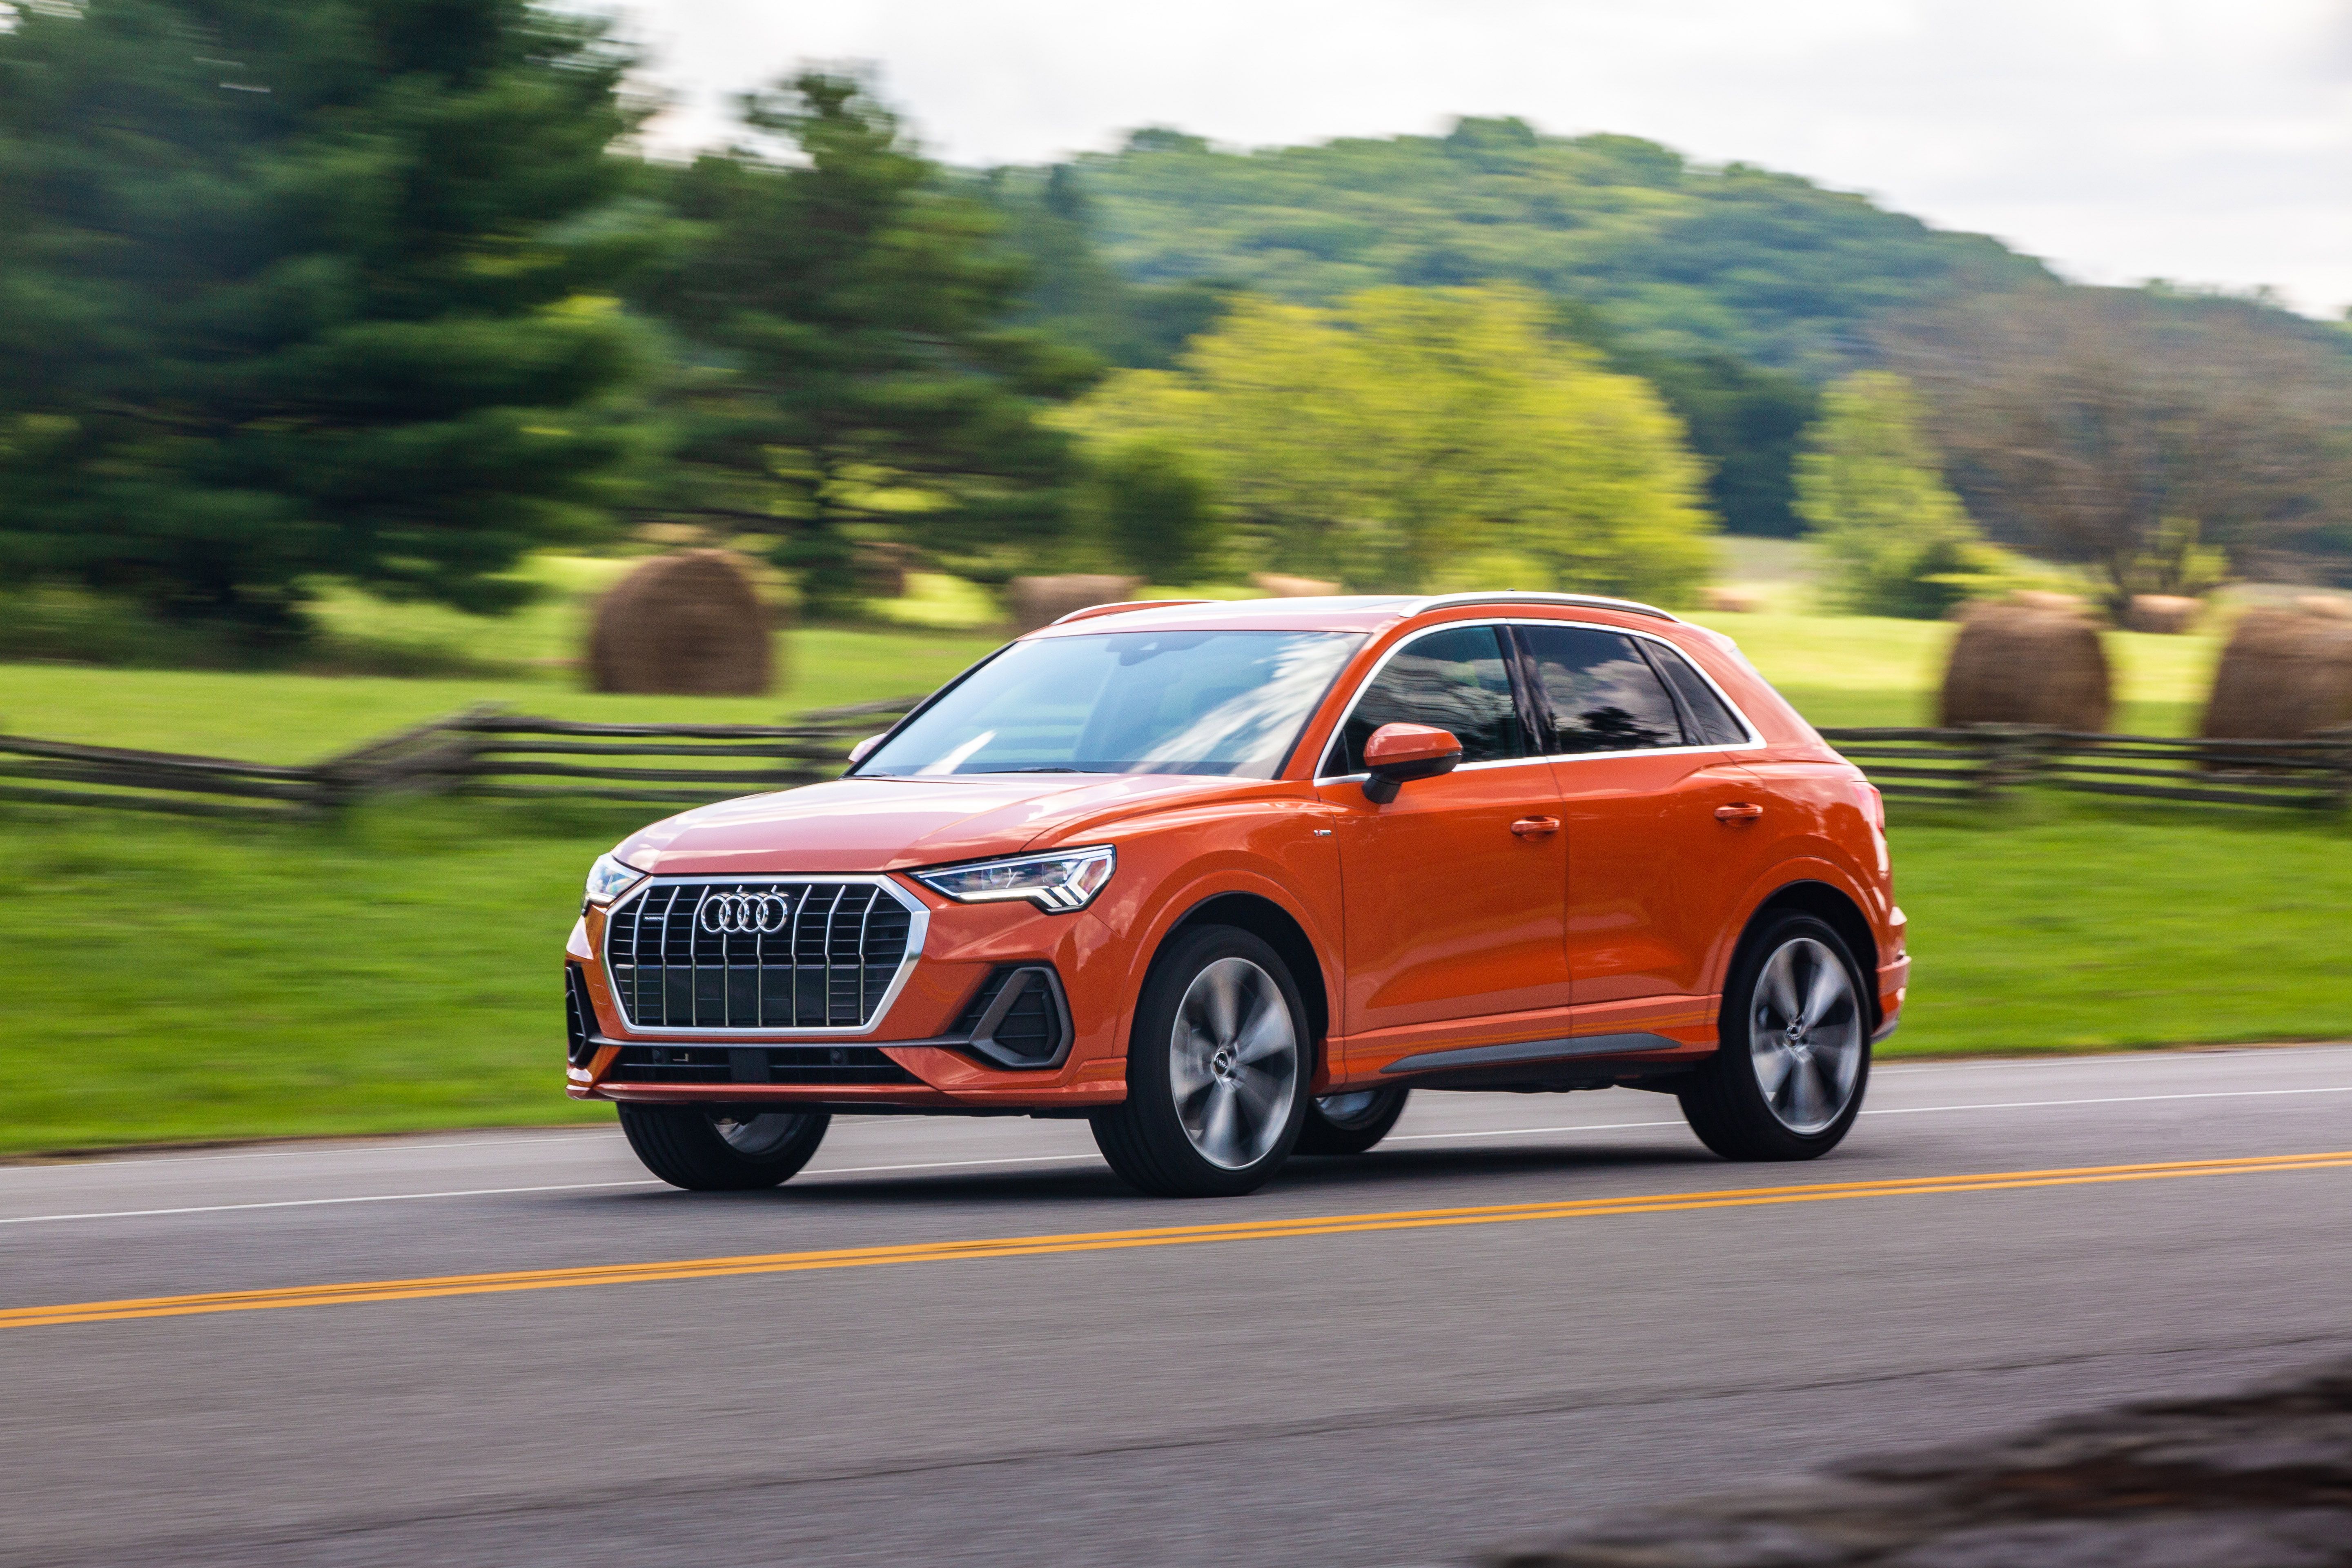 2019 Audi Q3 a Baby SUV Bred from VW's Parts Bin